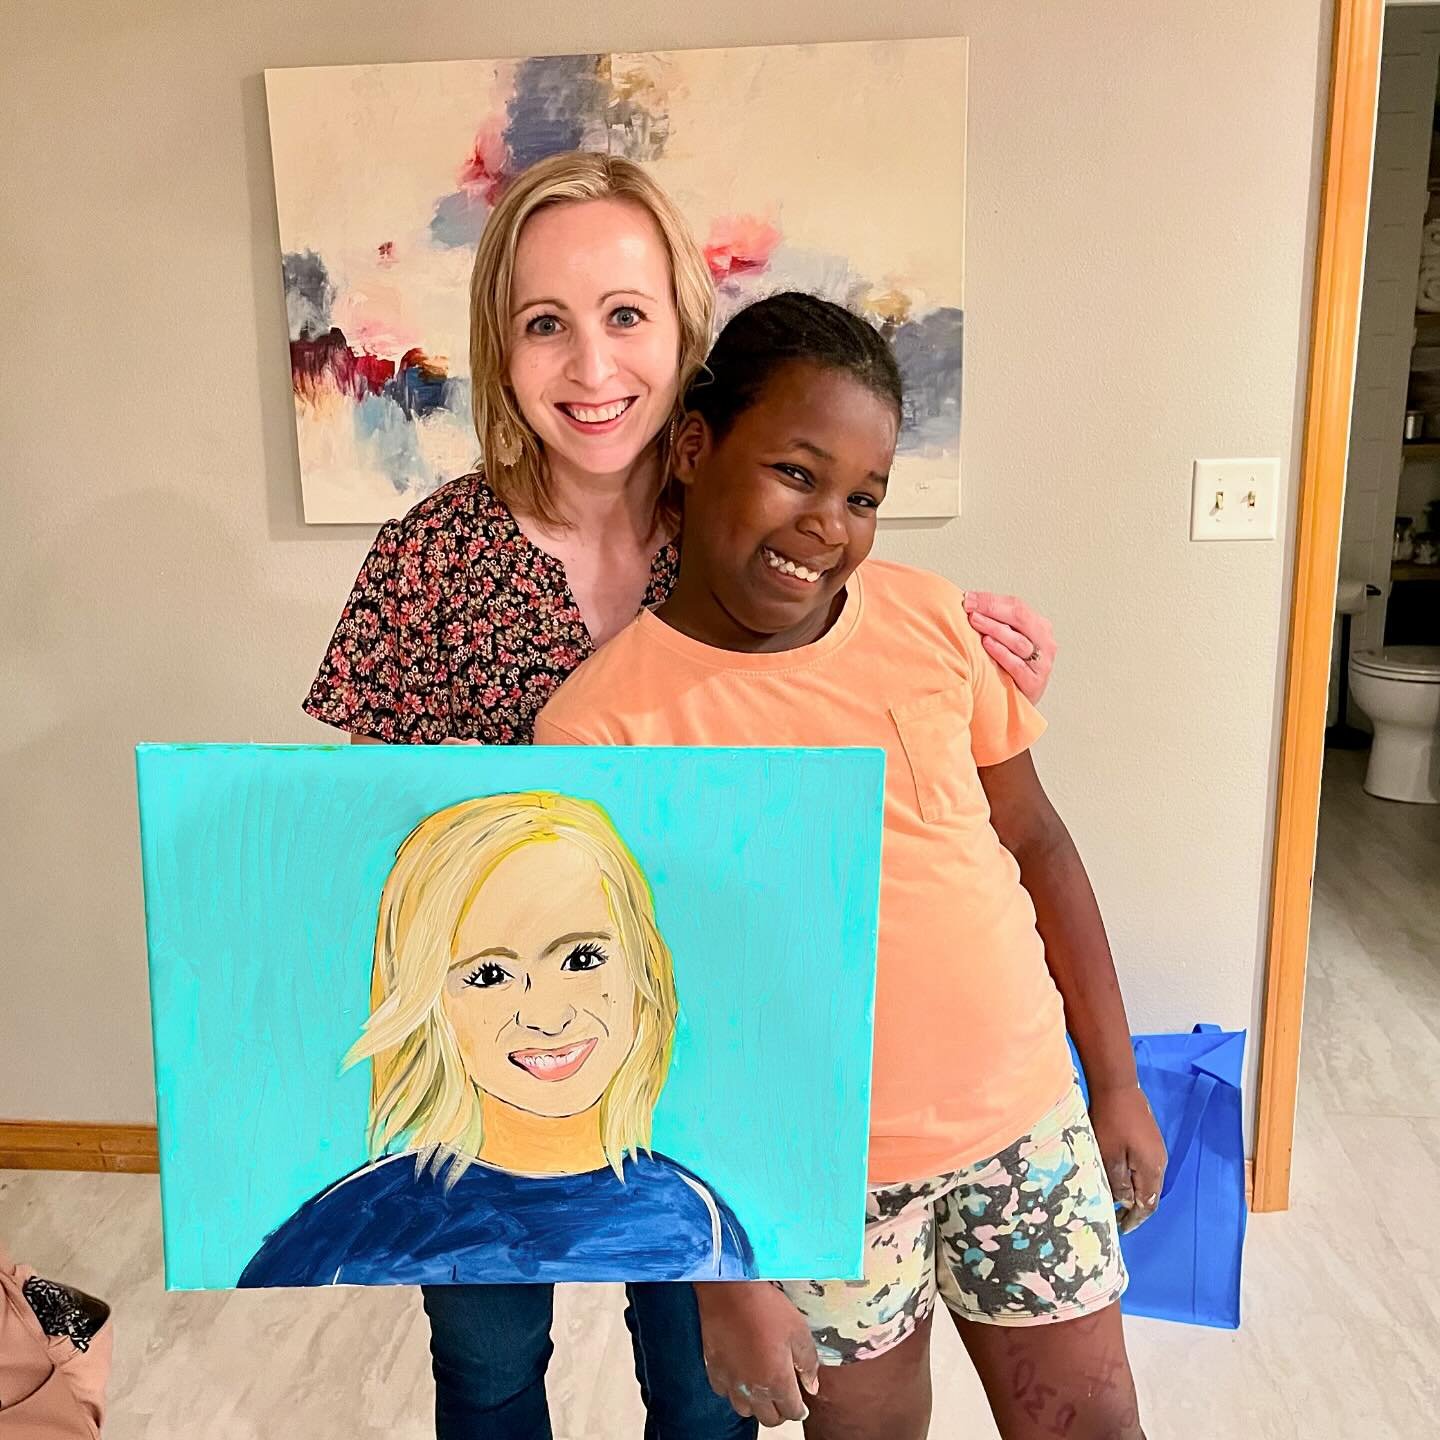 The girls got to choose what they painted for art class today, and they each chose to paint one of us. 🥰 So grateful for Jamie and her team at Stang Arts!